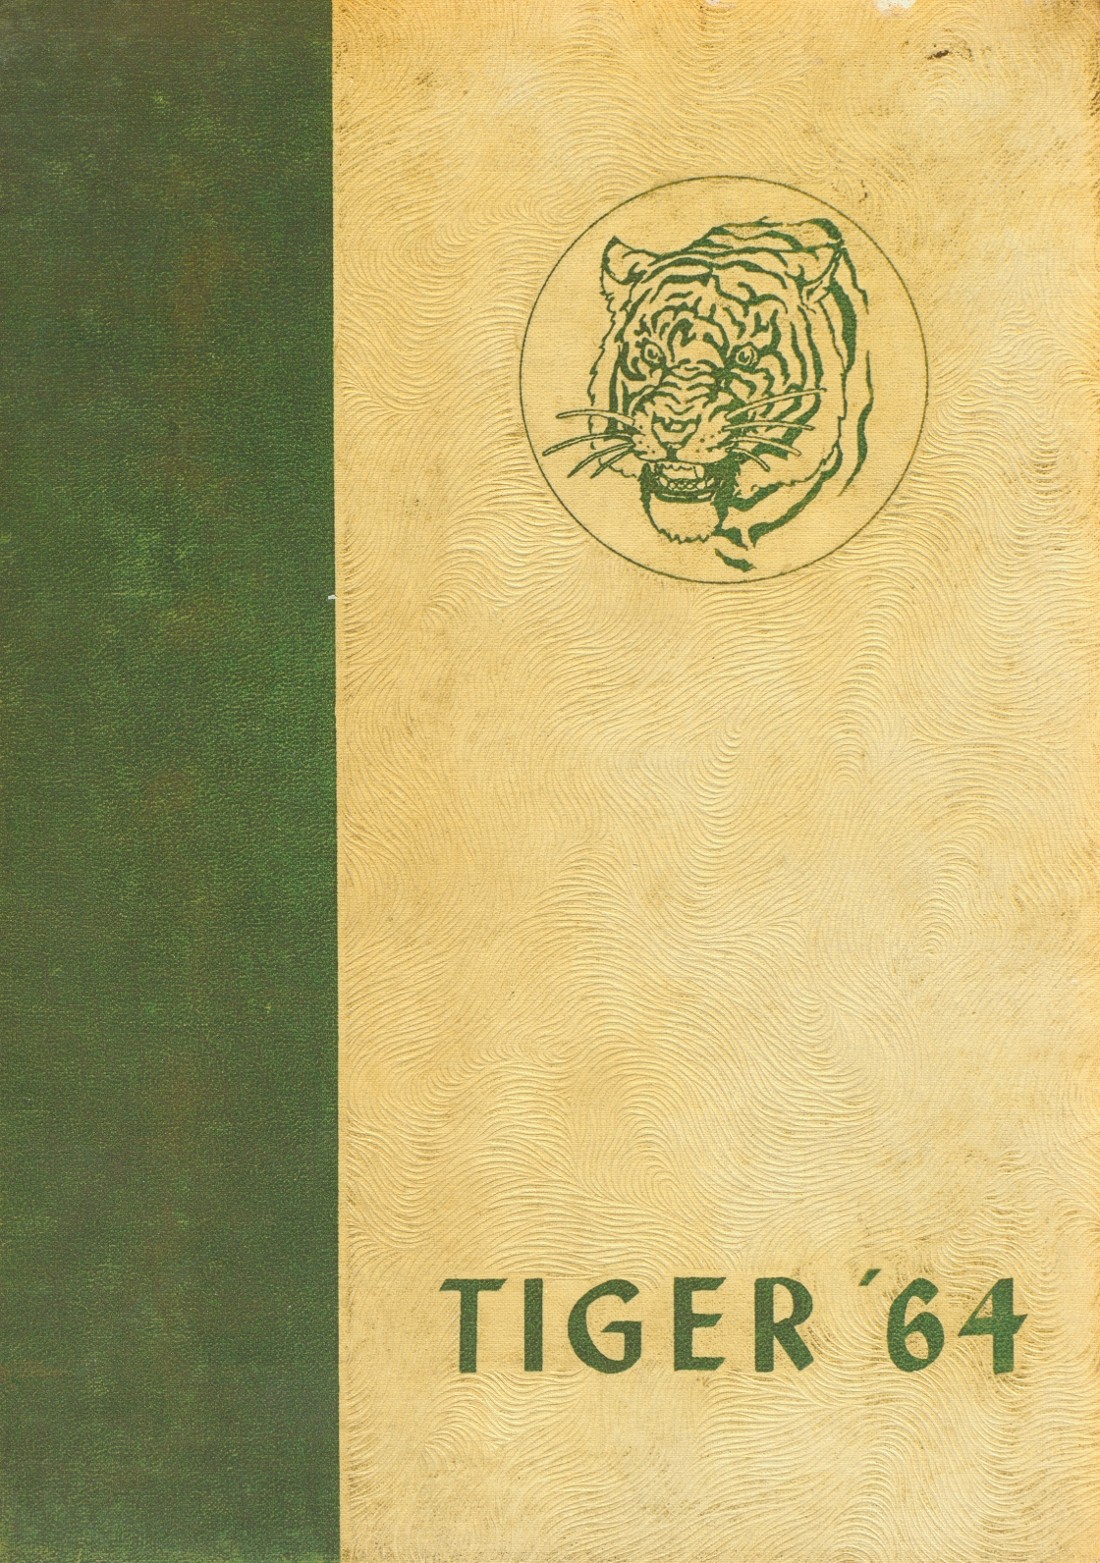 1964 yearbook from Murray High School from Murray, Kentucky for sale